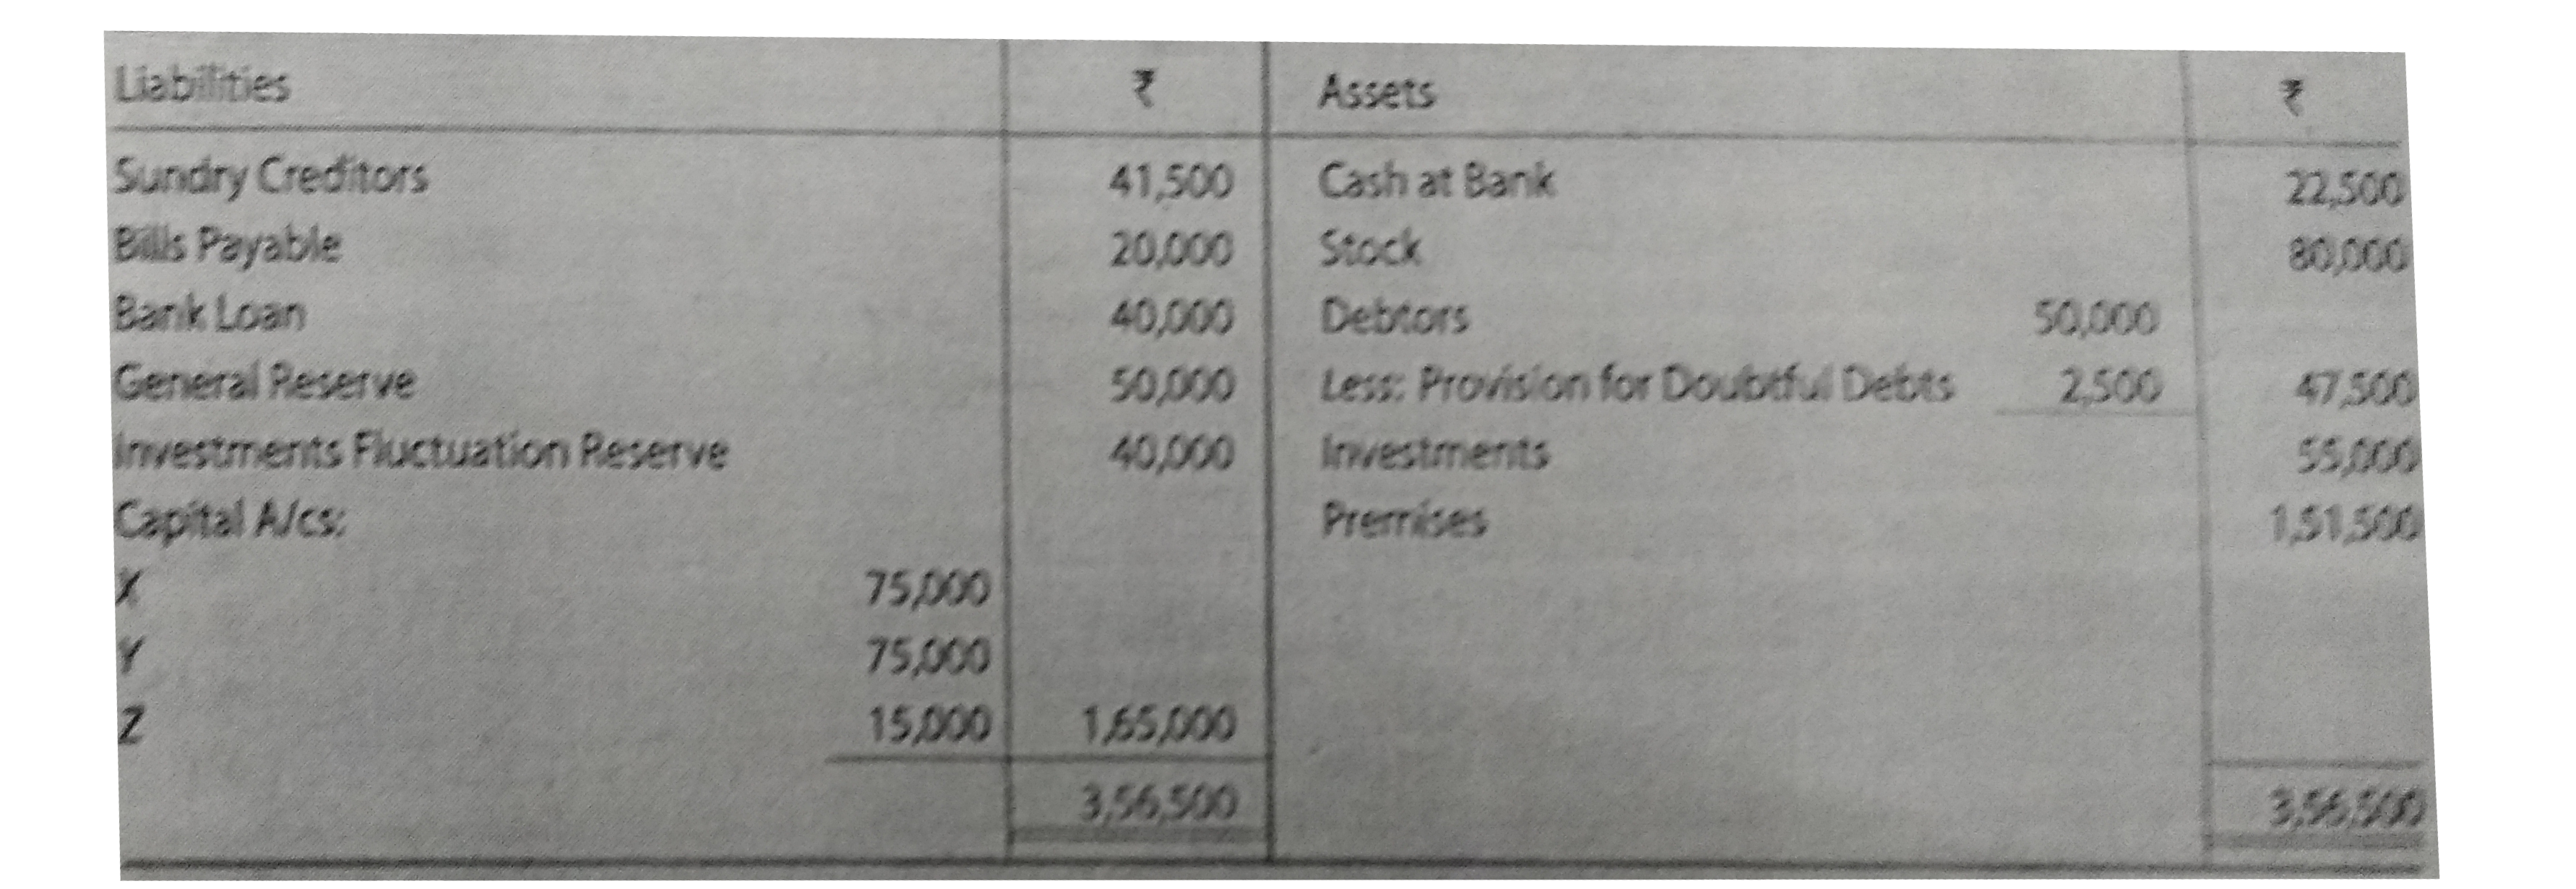 X, Y and Z carrying on business as merchants and sharing profits and losses in the ratio of 2 : 2 : 1 , dissolved their firm as at 31st March 2019, on which date their Balance Sheet was as follows :      A bill for ₹ 5,000 received from Mohan discounted from bank is not met on maturity .   The assets except Cast at Bank and Investments were sold to a company which paid ₹ 3,25,000 in cash . The investments were sold and ₹ 56,500 were received . Mohan proved insolvent and a dividend of 50% was received from his estate . Sundry Creditors (including Bills Payable ) were paid ₹ 57,000 in full settlement .   Realisation Expenses amounted to ₹ 15,000 .   Prepare Realisation Account , Partner's Capital Accounts and Bank Account .